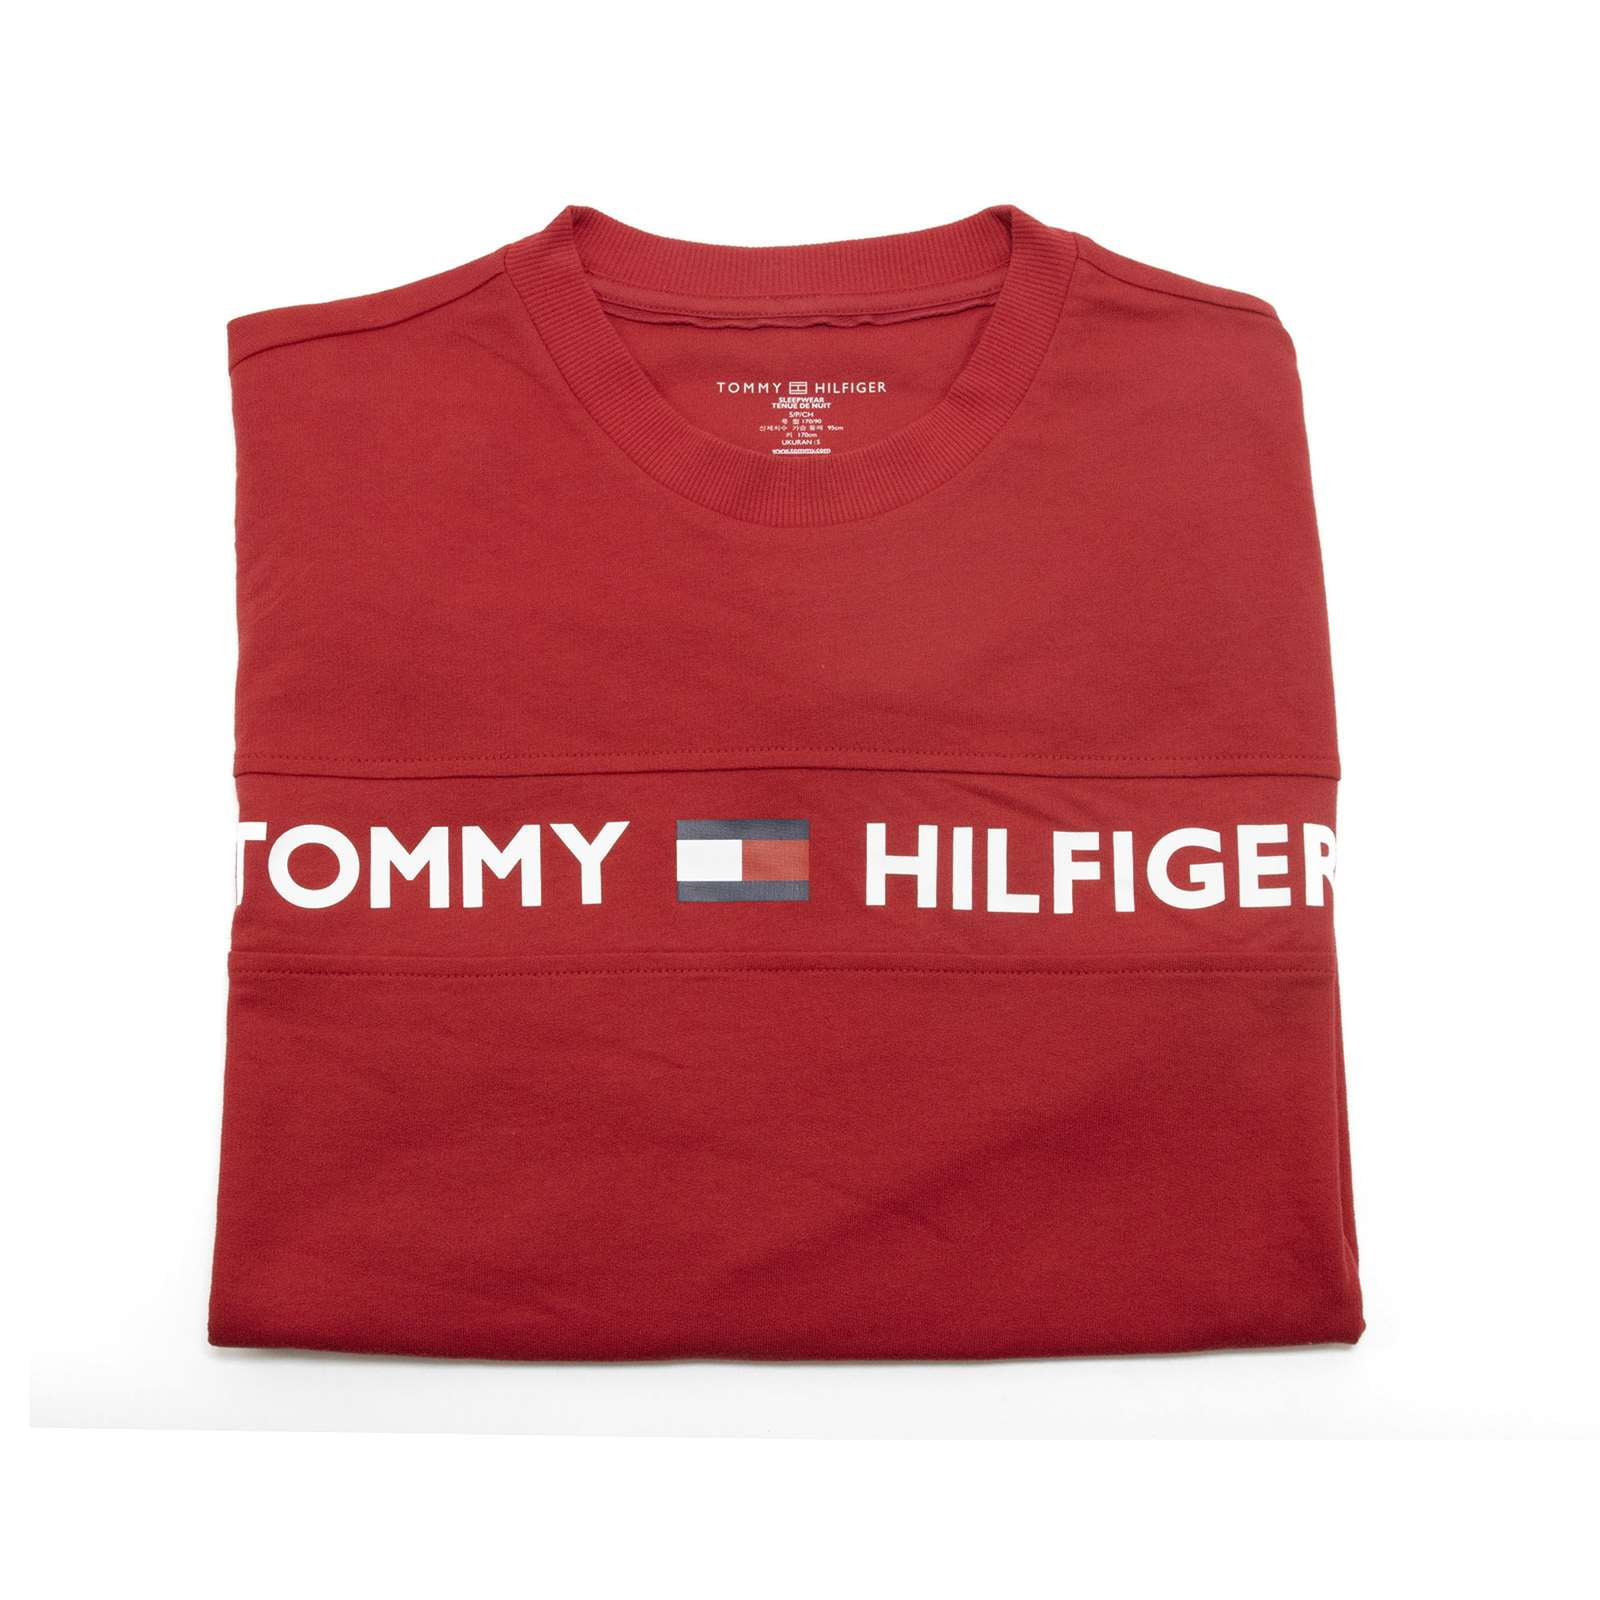 Tommy Hilfiger T-shirt Brand New 2019 in 3 colors FATHER'S DAY GIFT